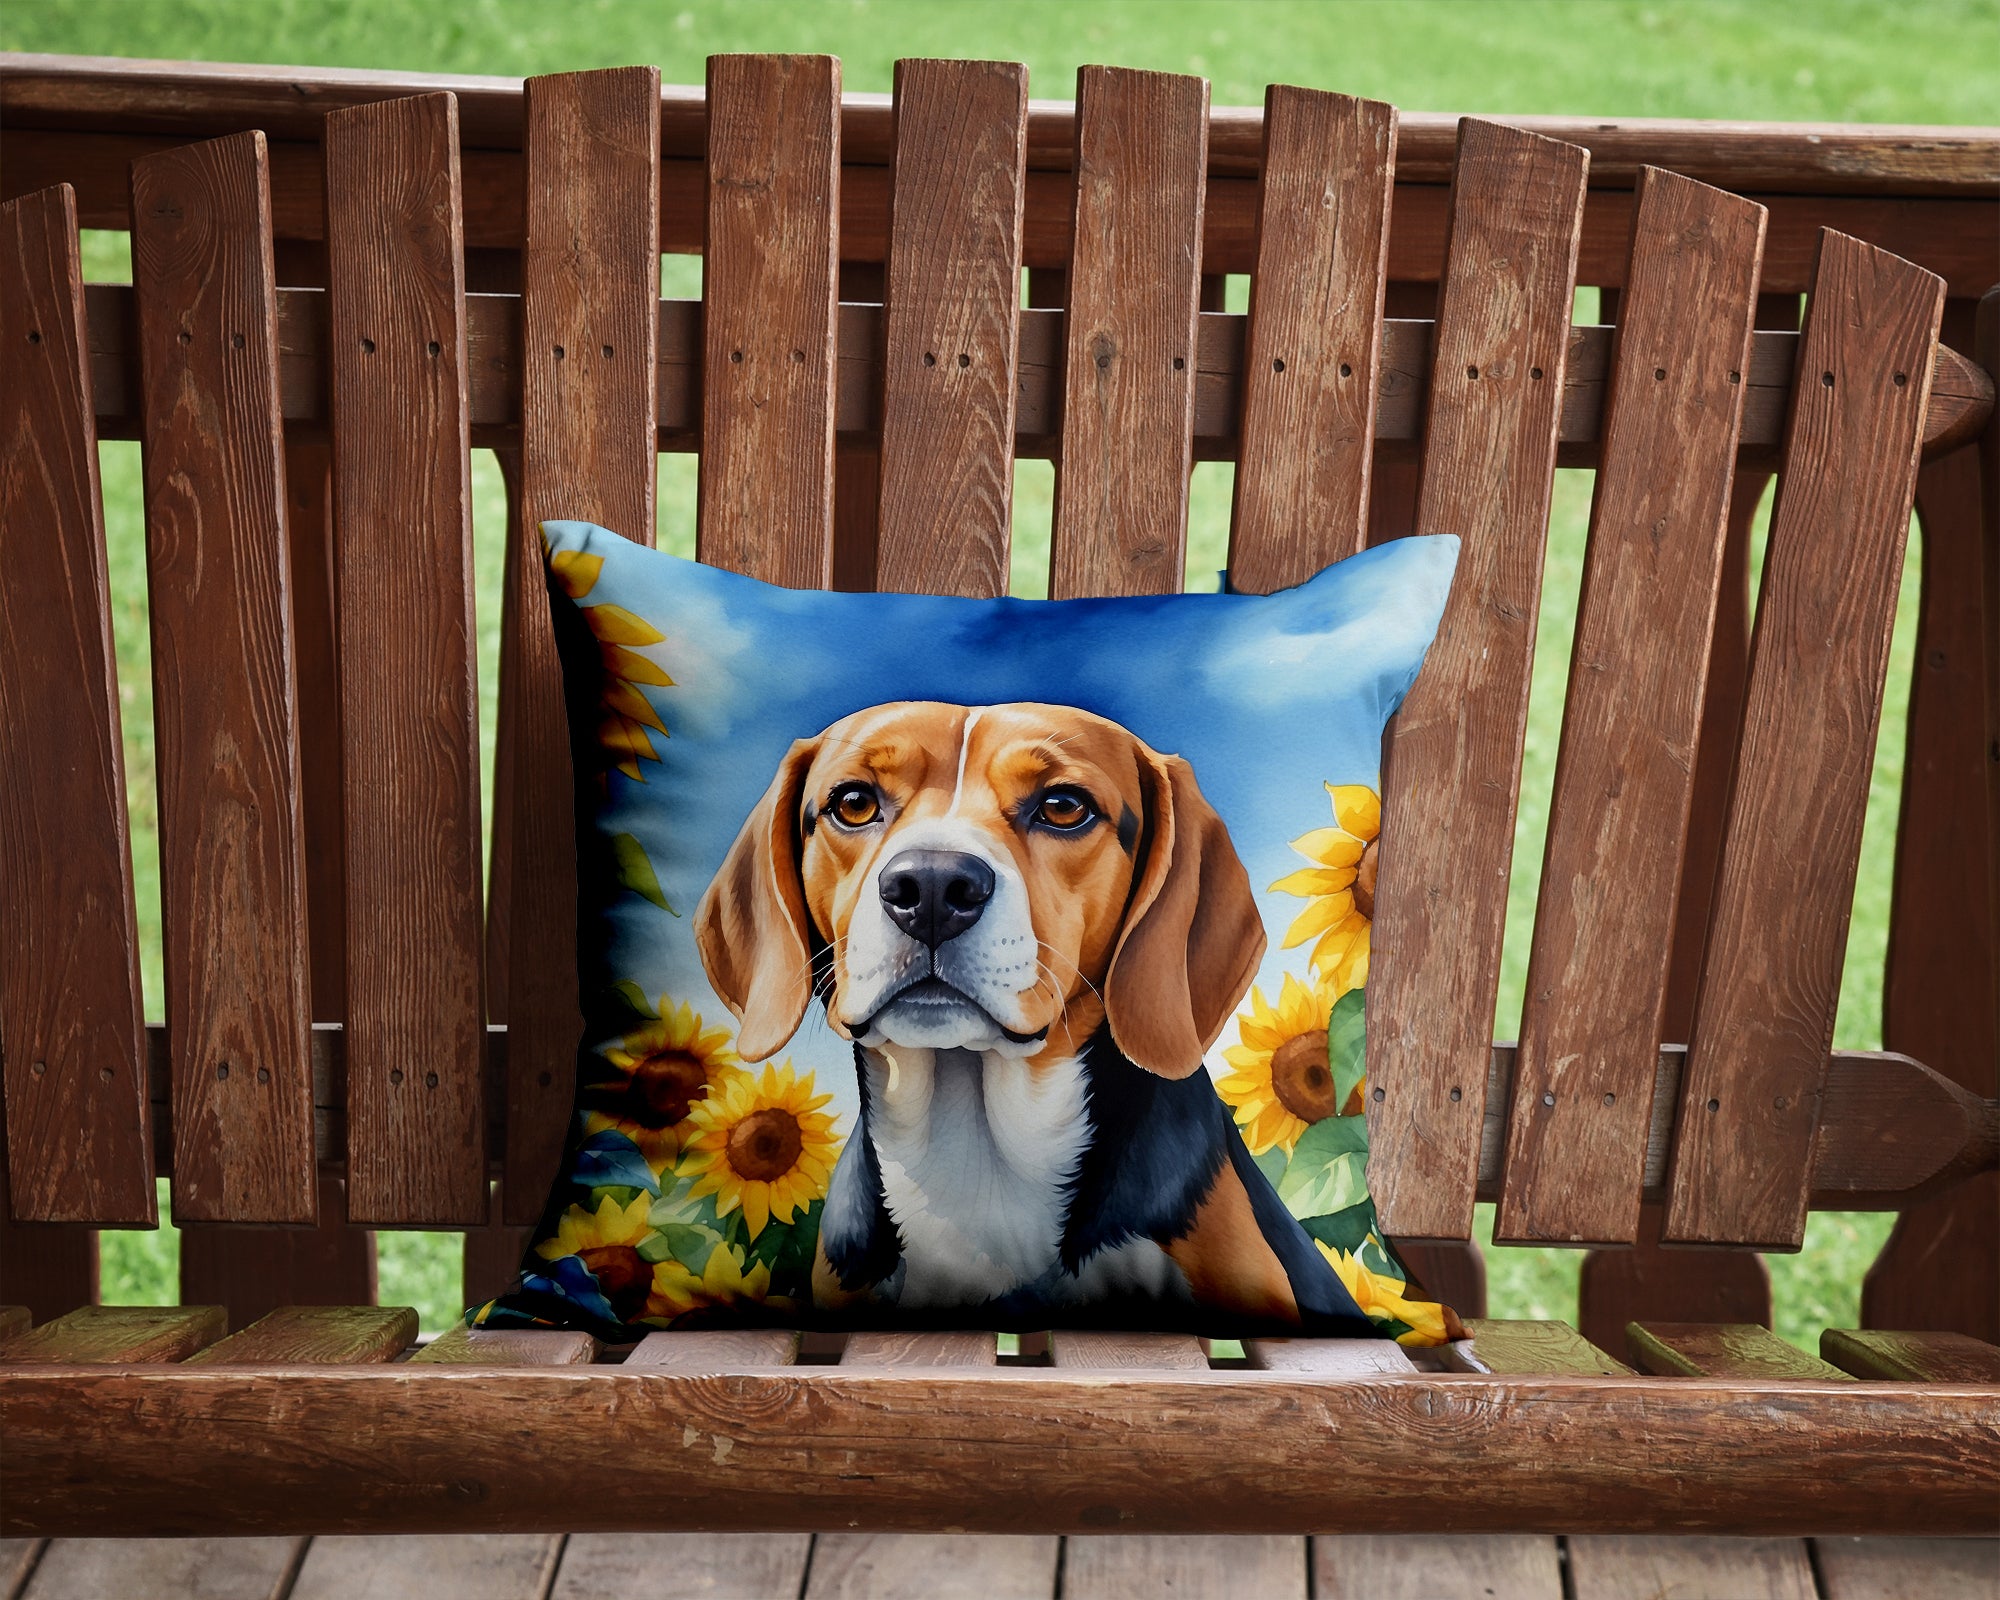 Buy this Beagle in Sunflowers Throw Pillow